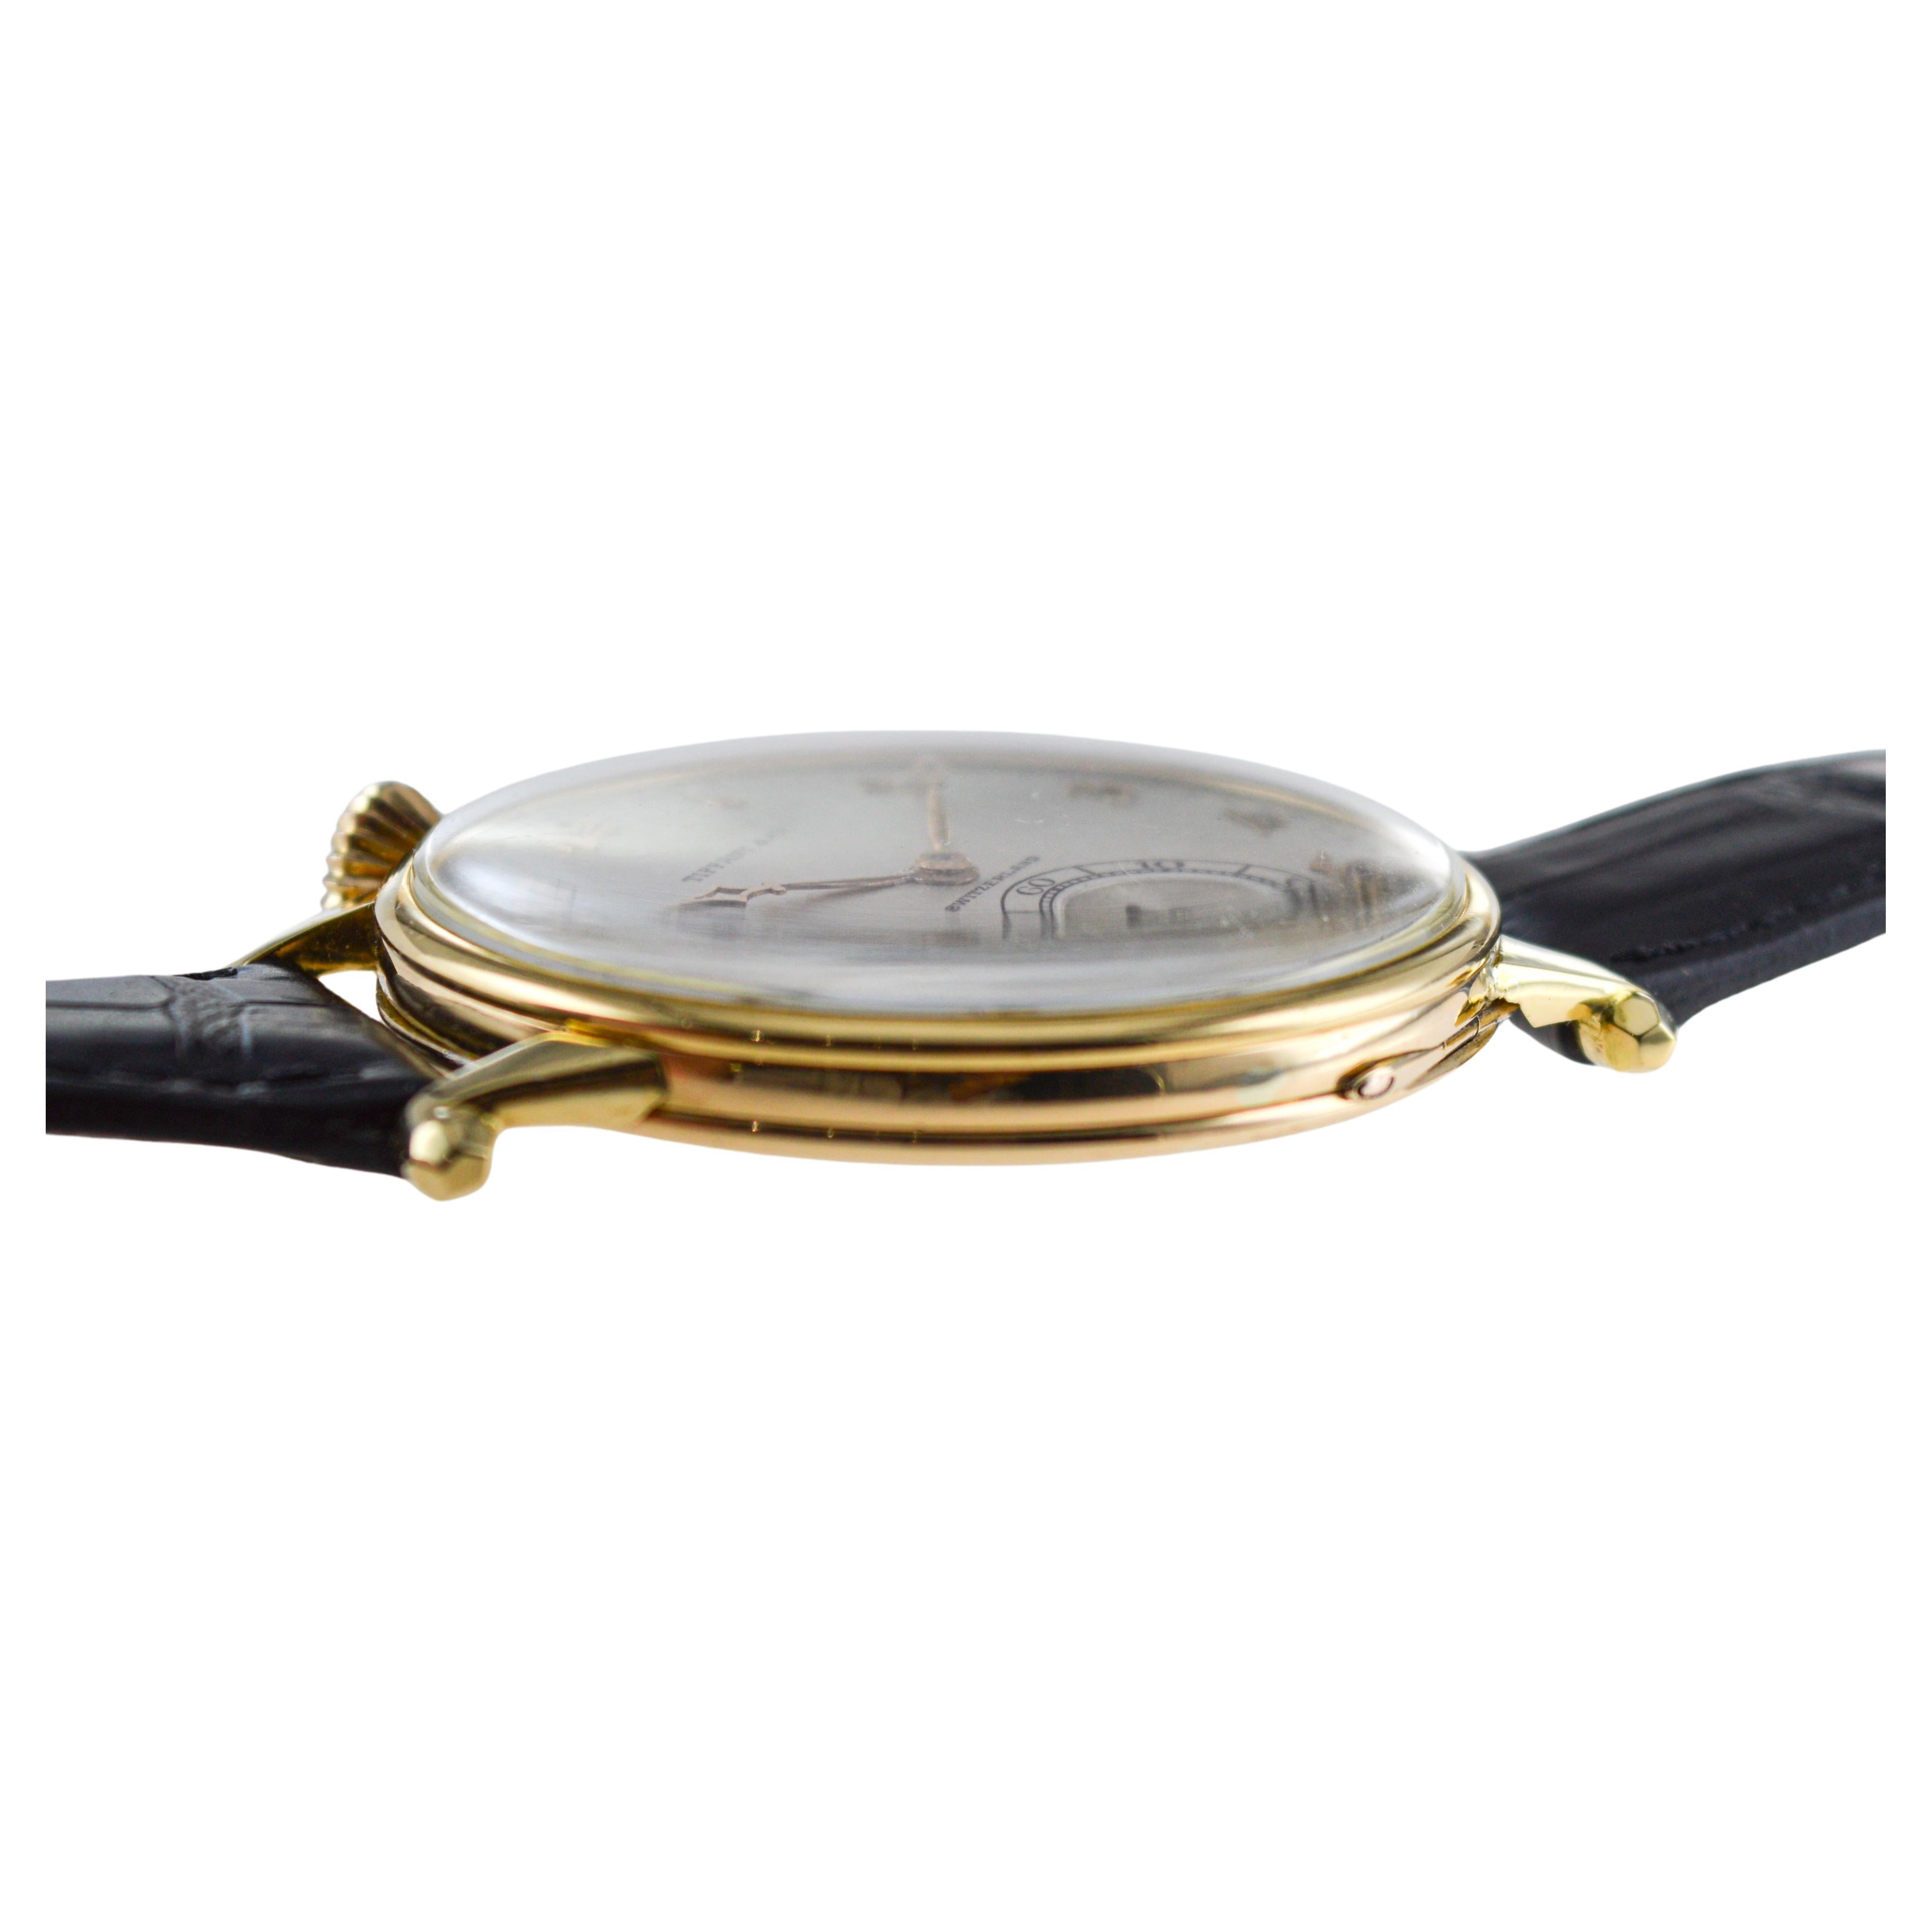 Agassiz 18Kt. Gold Oversized Watch for Tiffany & Co. Stern Freres Dial 1920's For Sale 6